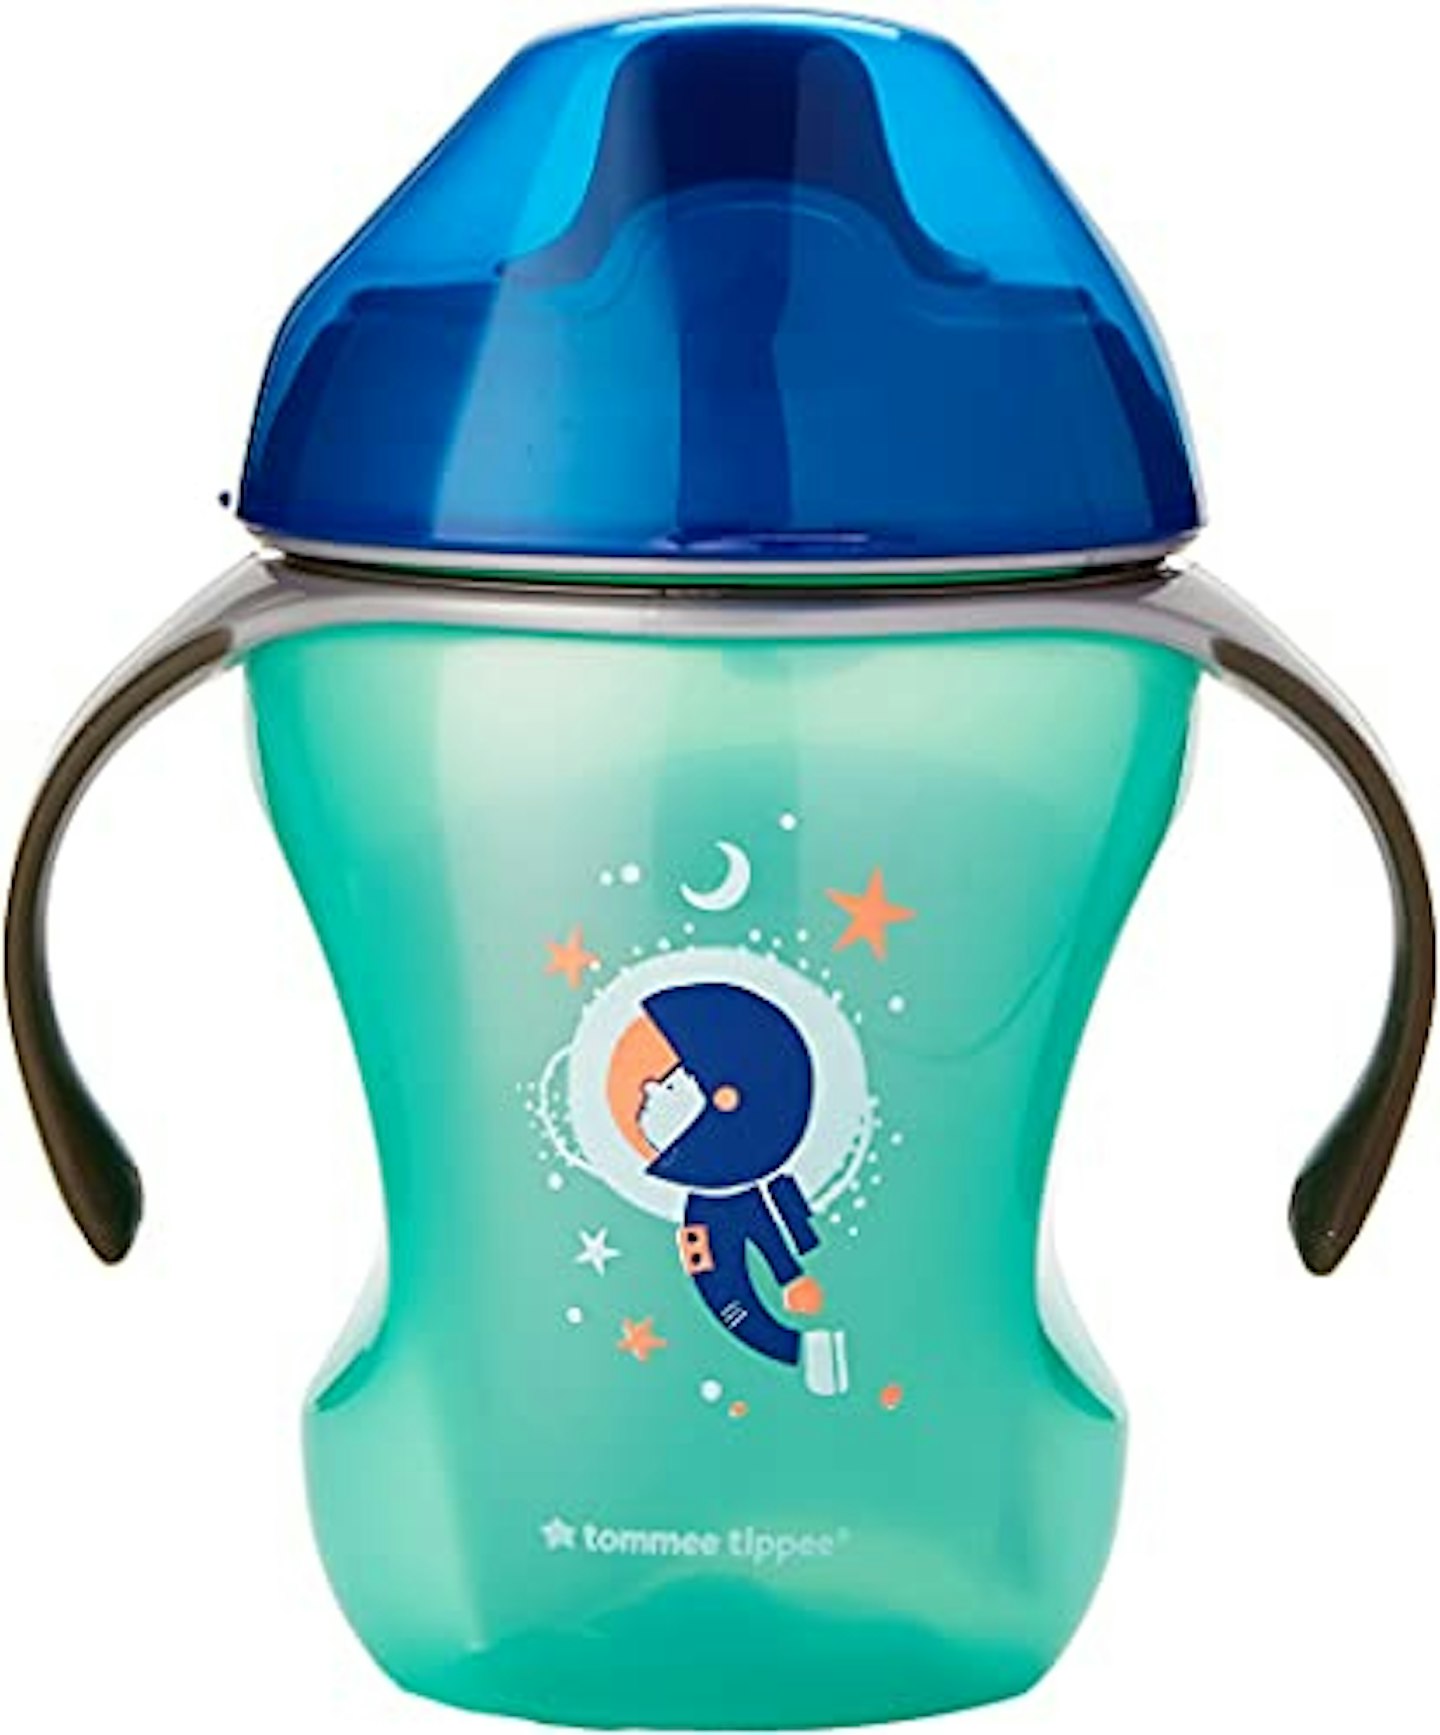 The best sippy cup to hold: Tommee Tippee Sippy Cup Trainer